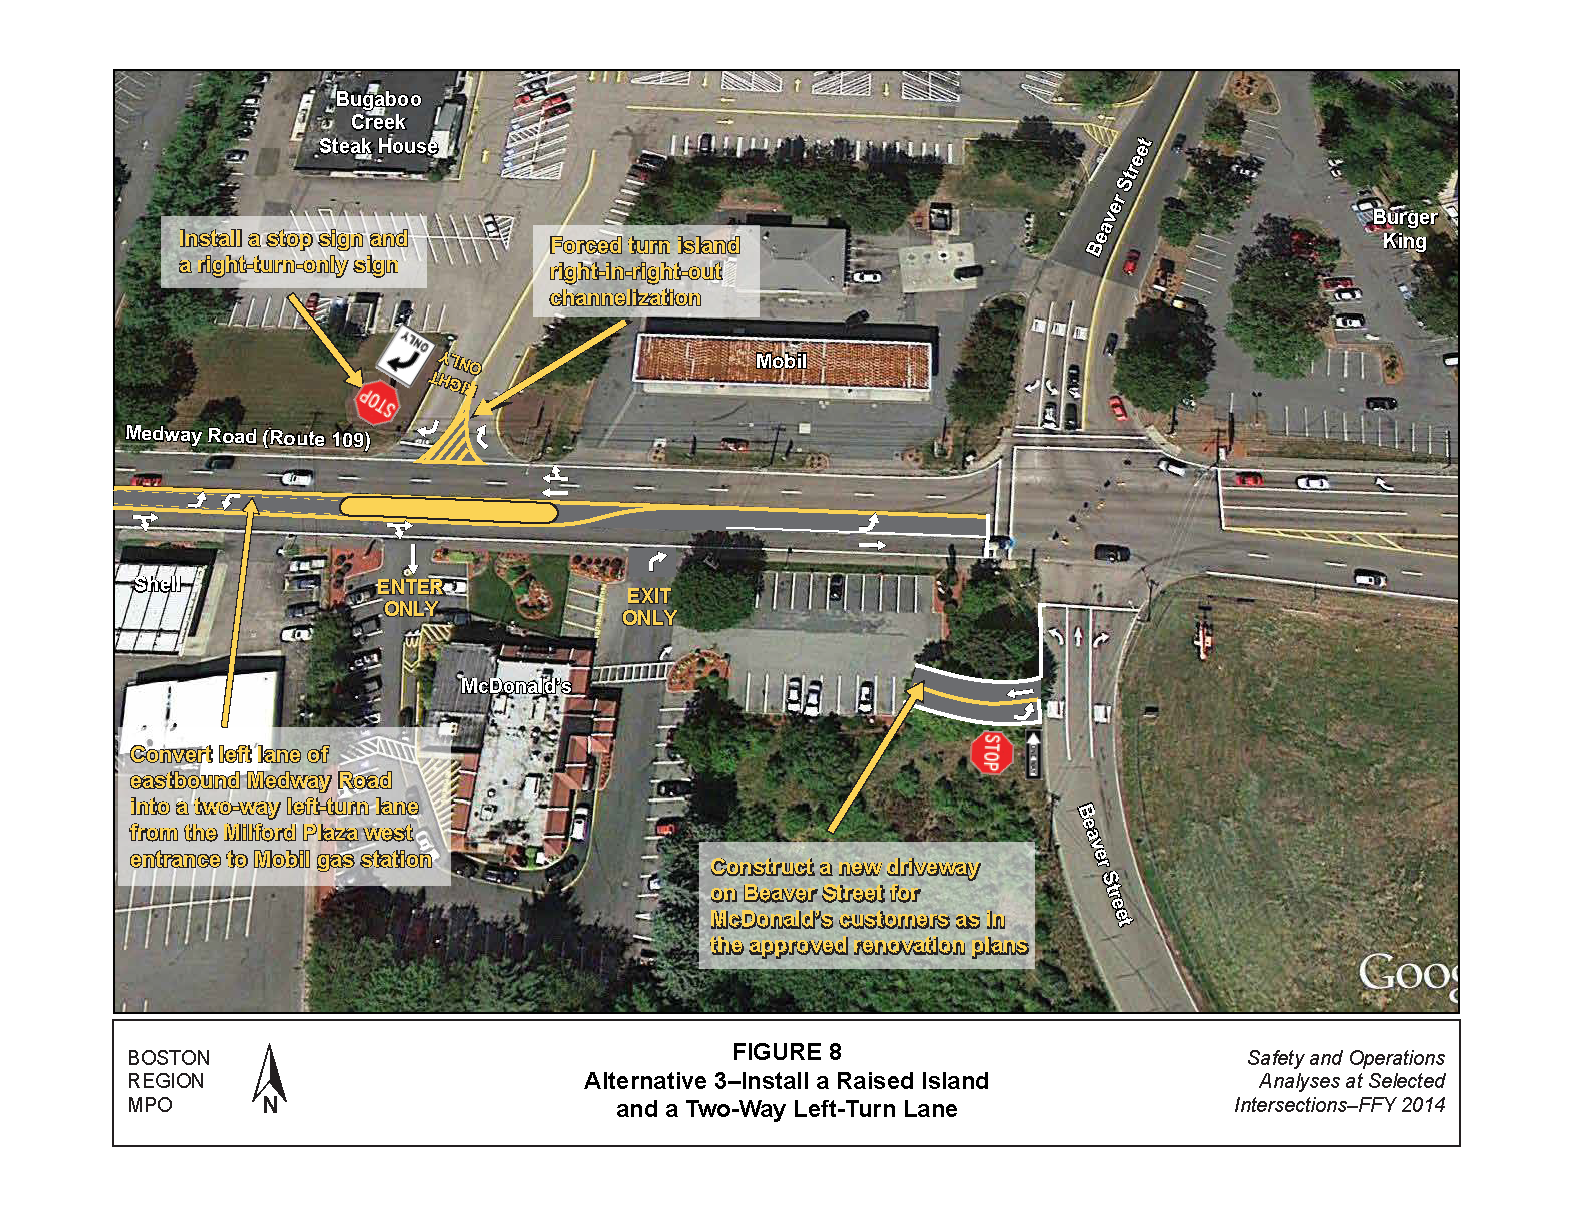 FIGURE 8. Aerial-view map that illustrates MPO staff “Improvement Alternative 3,” which recommends installing a raised island in the vicinity of Kmart and McDonald’s driveways to prohibit left turns, and providing a two-way left-turn lane to improve access to businesses.